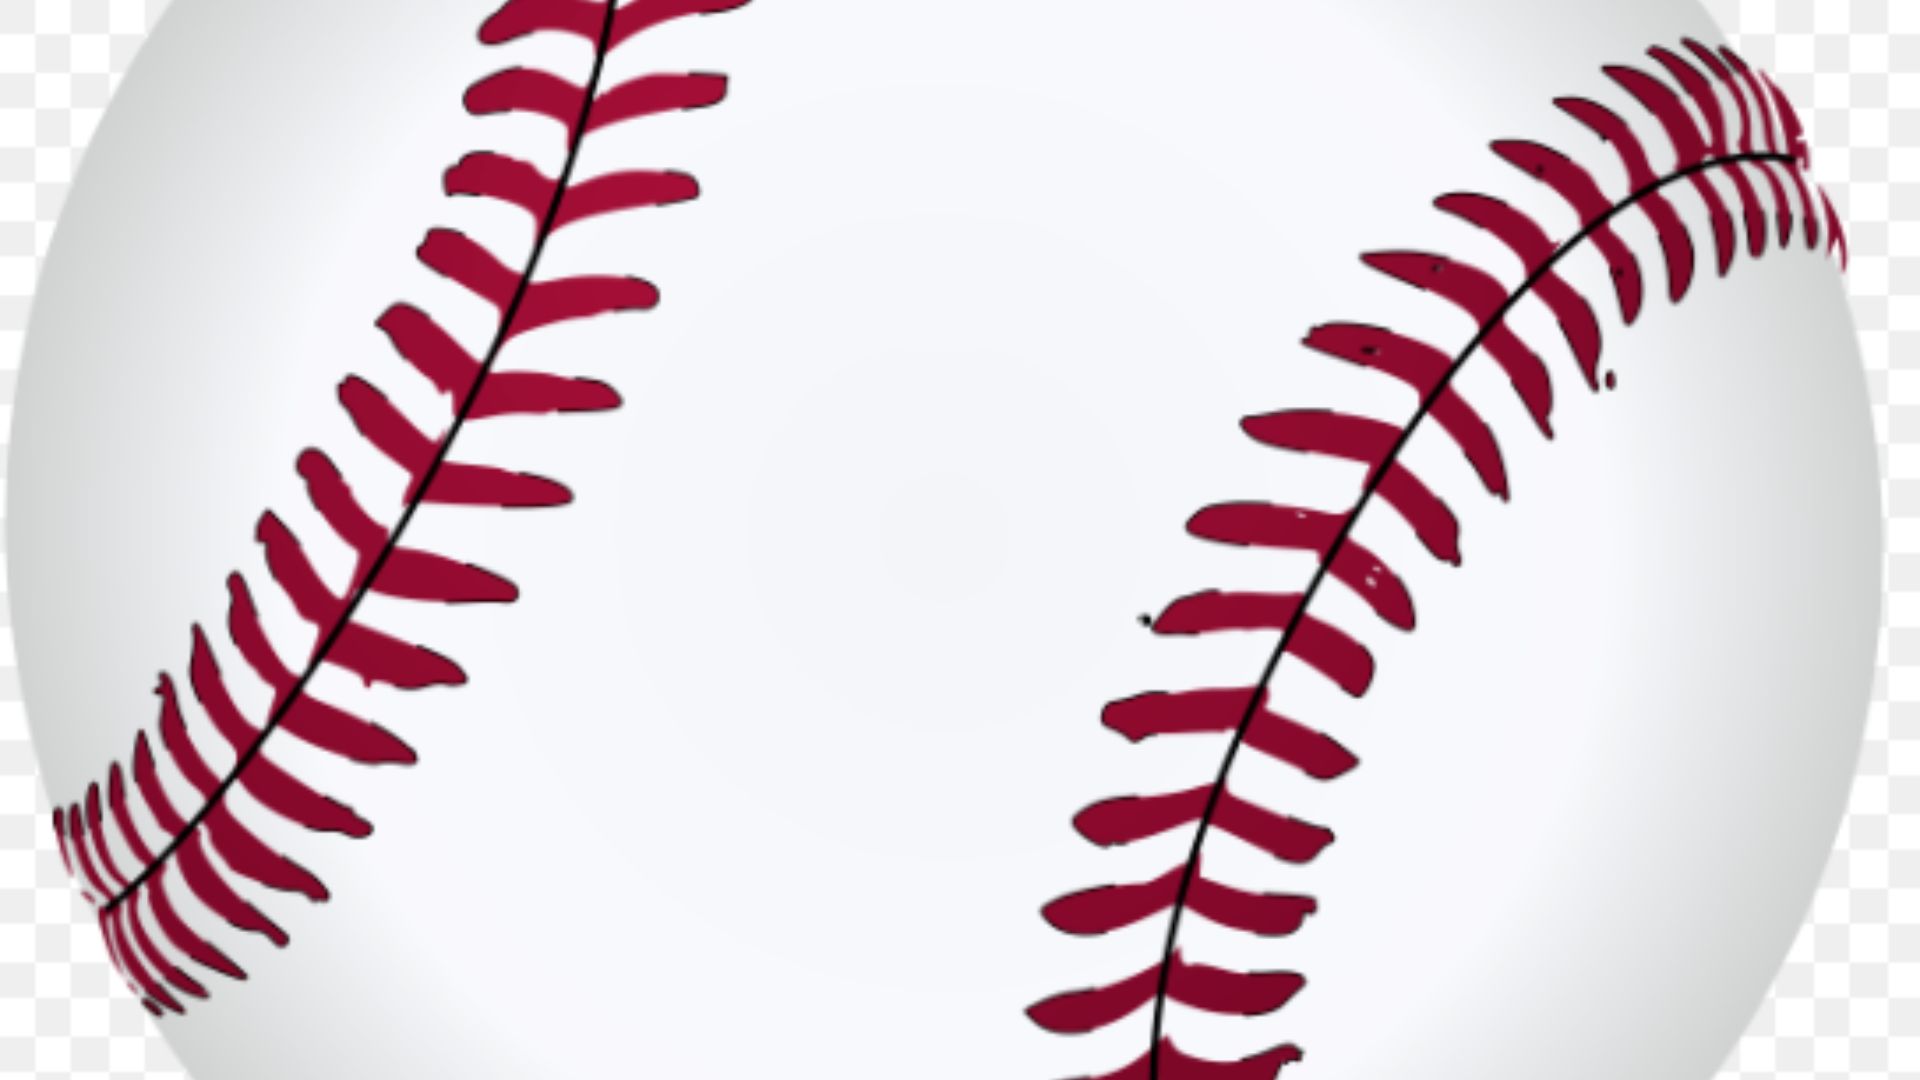 A picture showing a baseball.